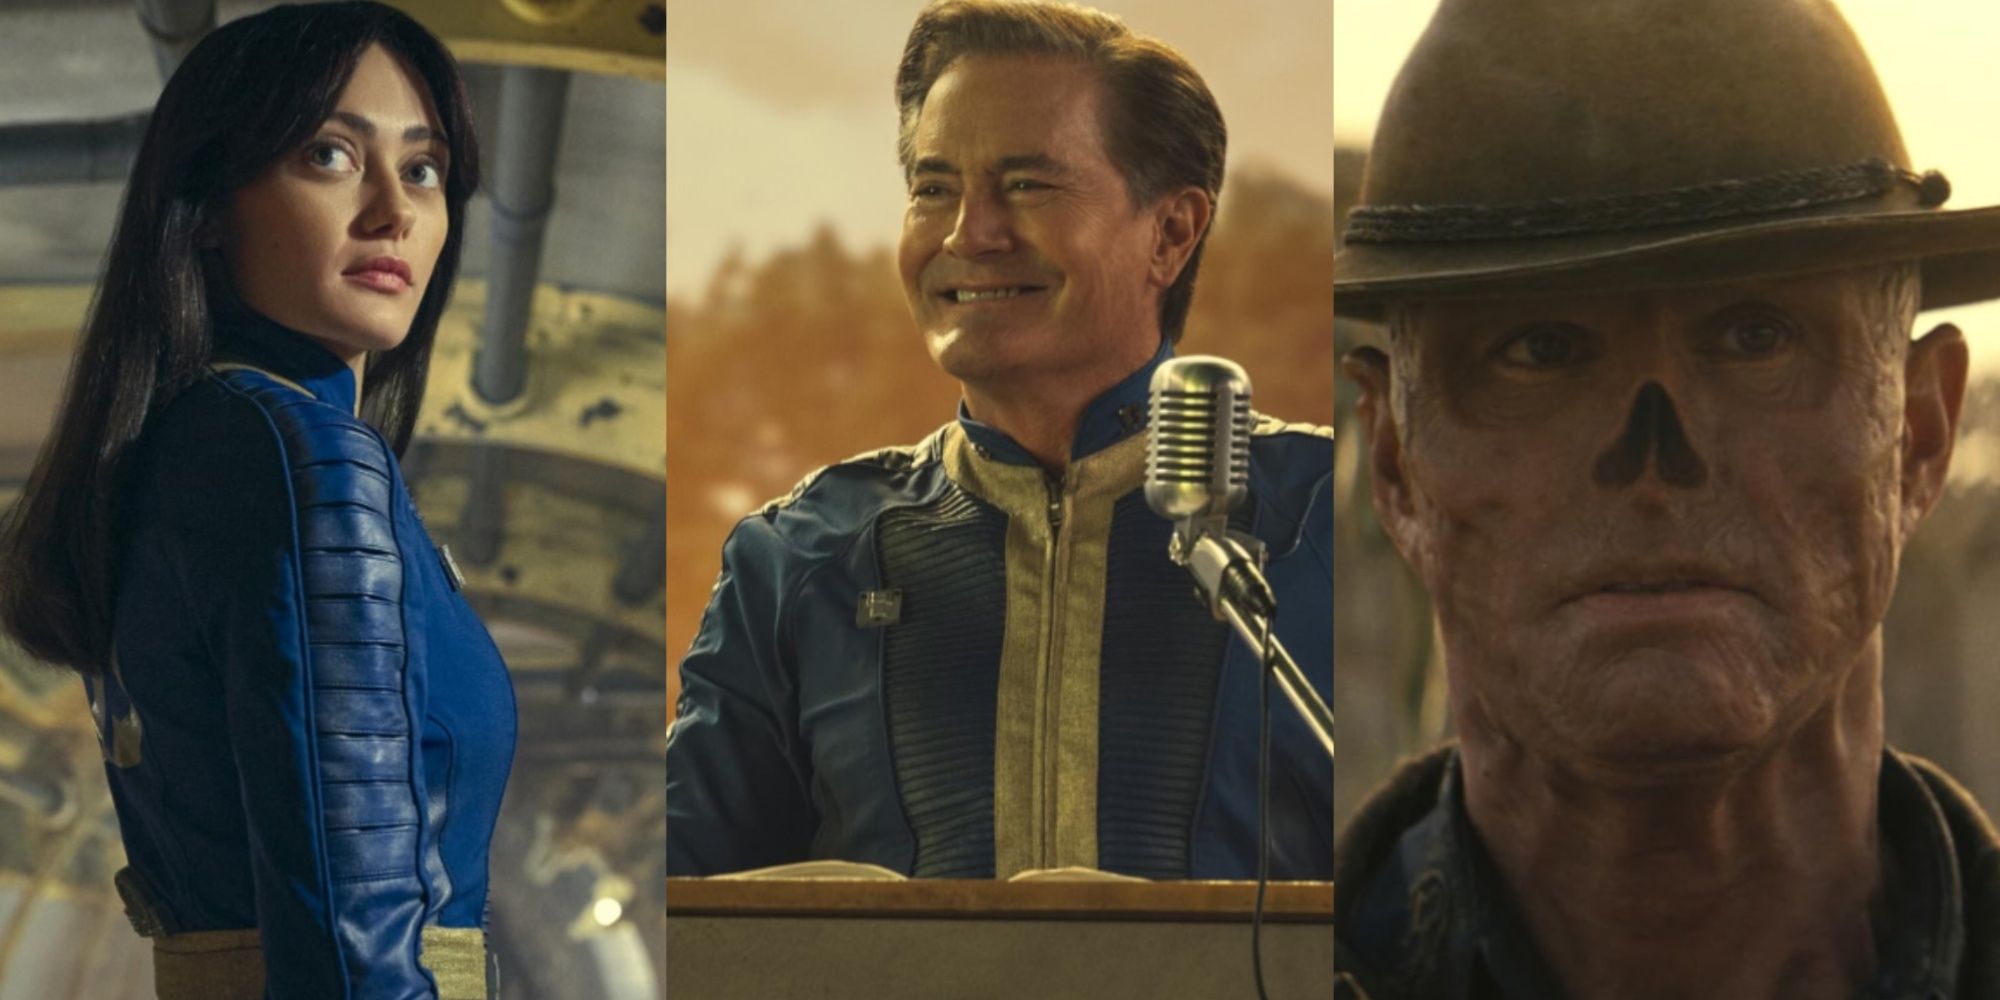 Three-image collage of Ella Purnell as Lucy in Fallout, Kyle MacLachlan as Lucy's dad Hank, and Walton Goggins as a Ghoul.